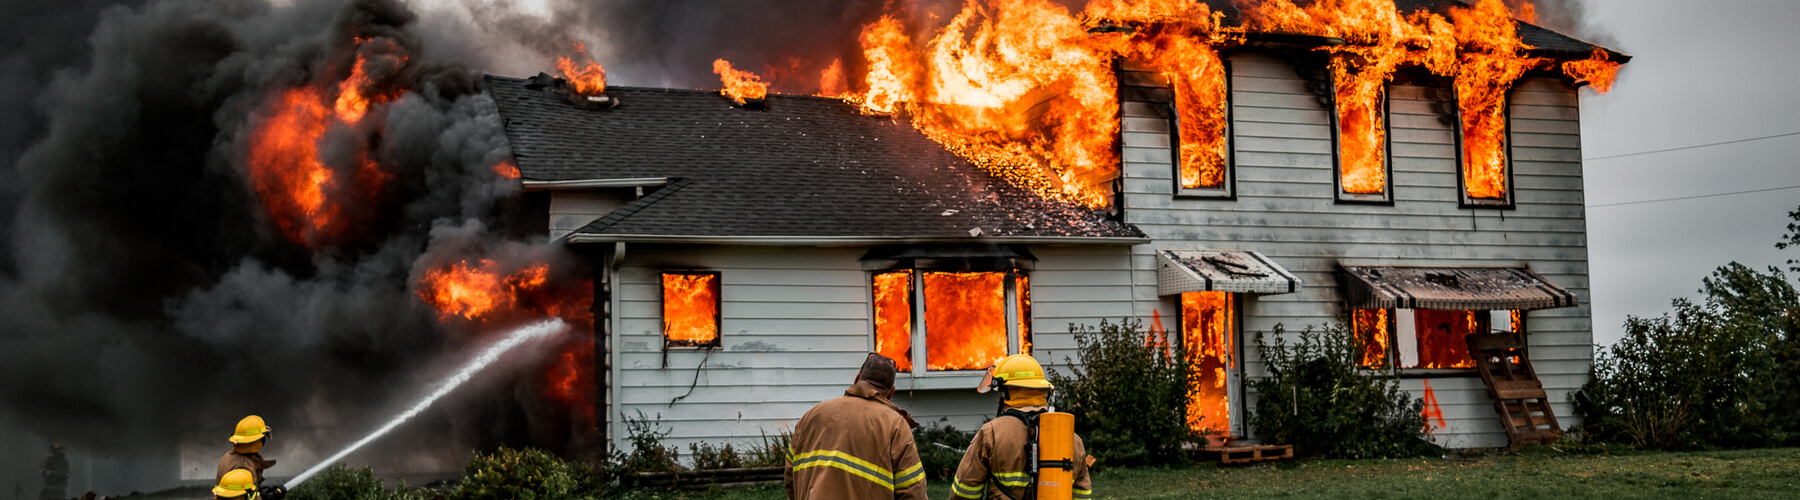 Asbestos Exposure After a House Fire